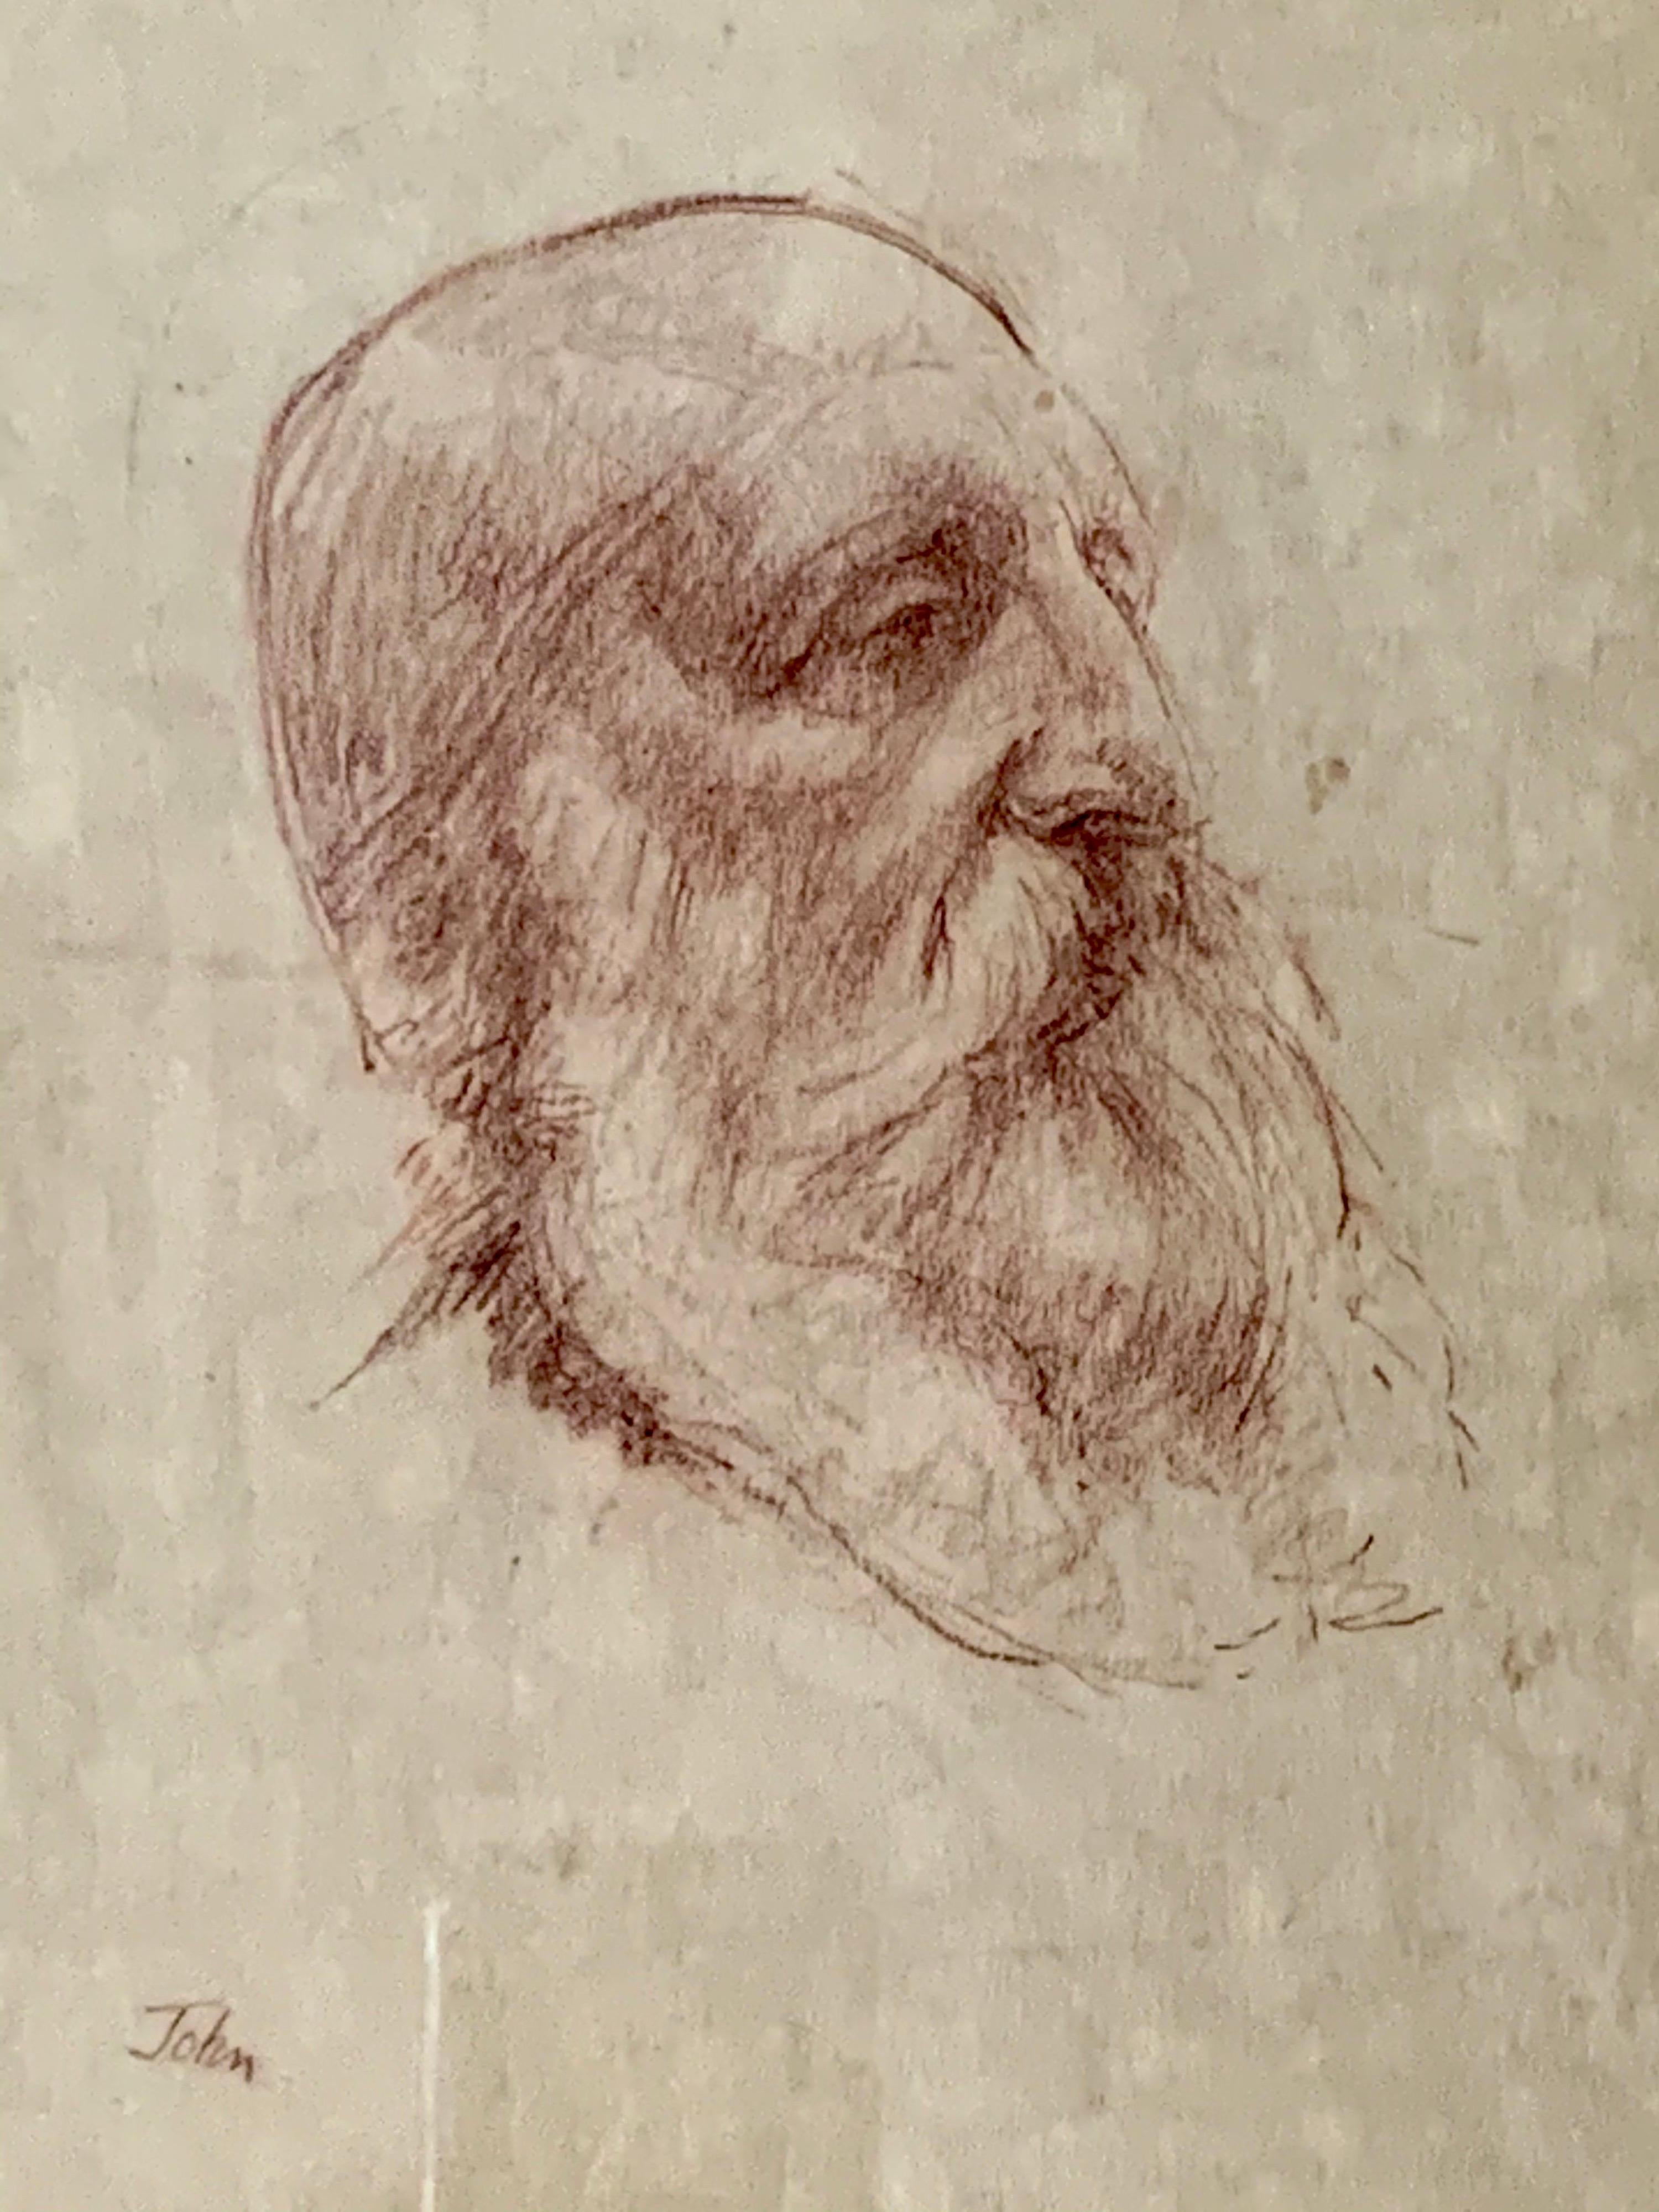 Portrait of a bearded gentleman
signed 'John' (lower left);
pencil
24 x 19 cm) 9 1/2 x 7 1/2 in).
Executed circa 1900
Provenence: Bought in Bonhams sale 1972.
Look at the images to see the original catalogue
Superb condition.